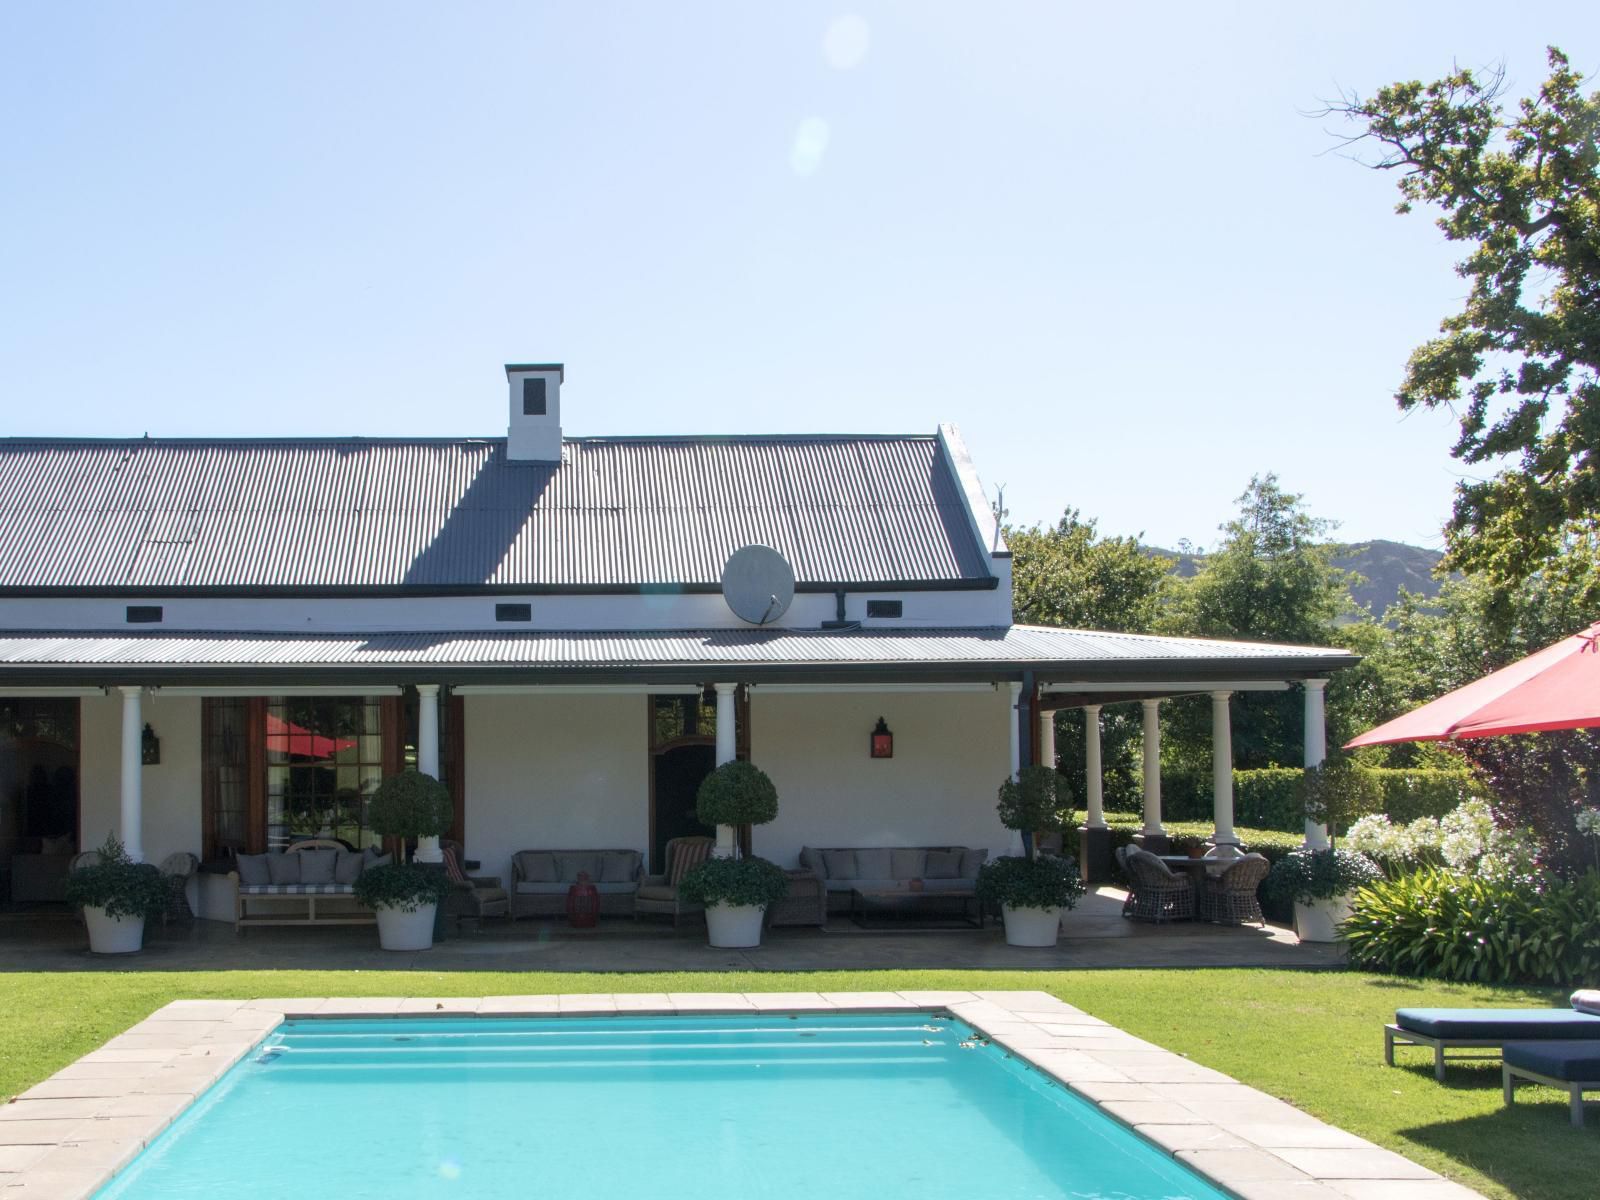 La Cle Village Franschhoek Western Cape South Africa House, Building, Architecture, Swimming Pool